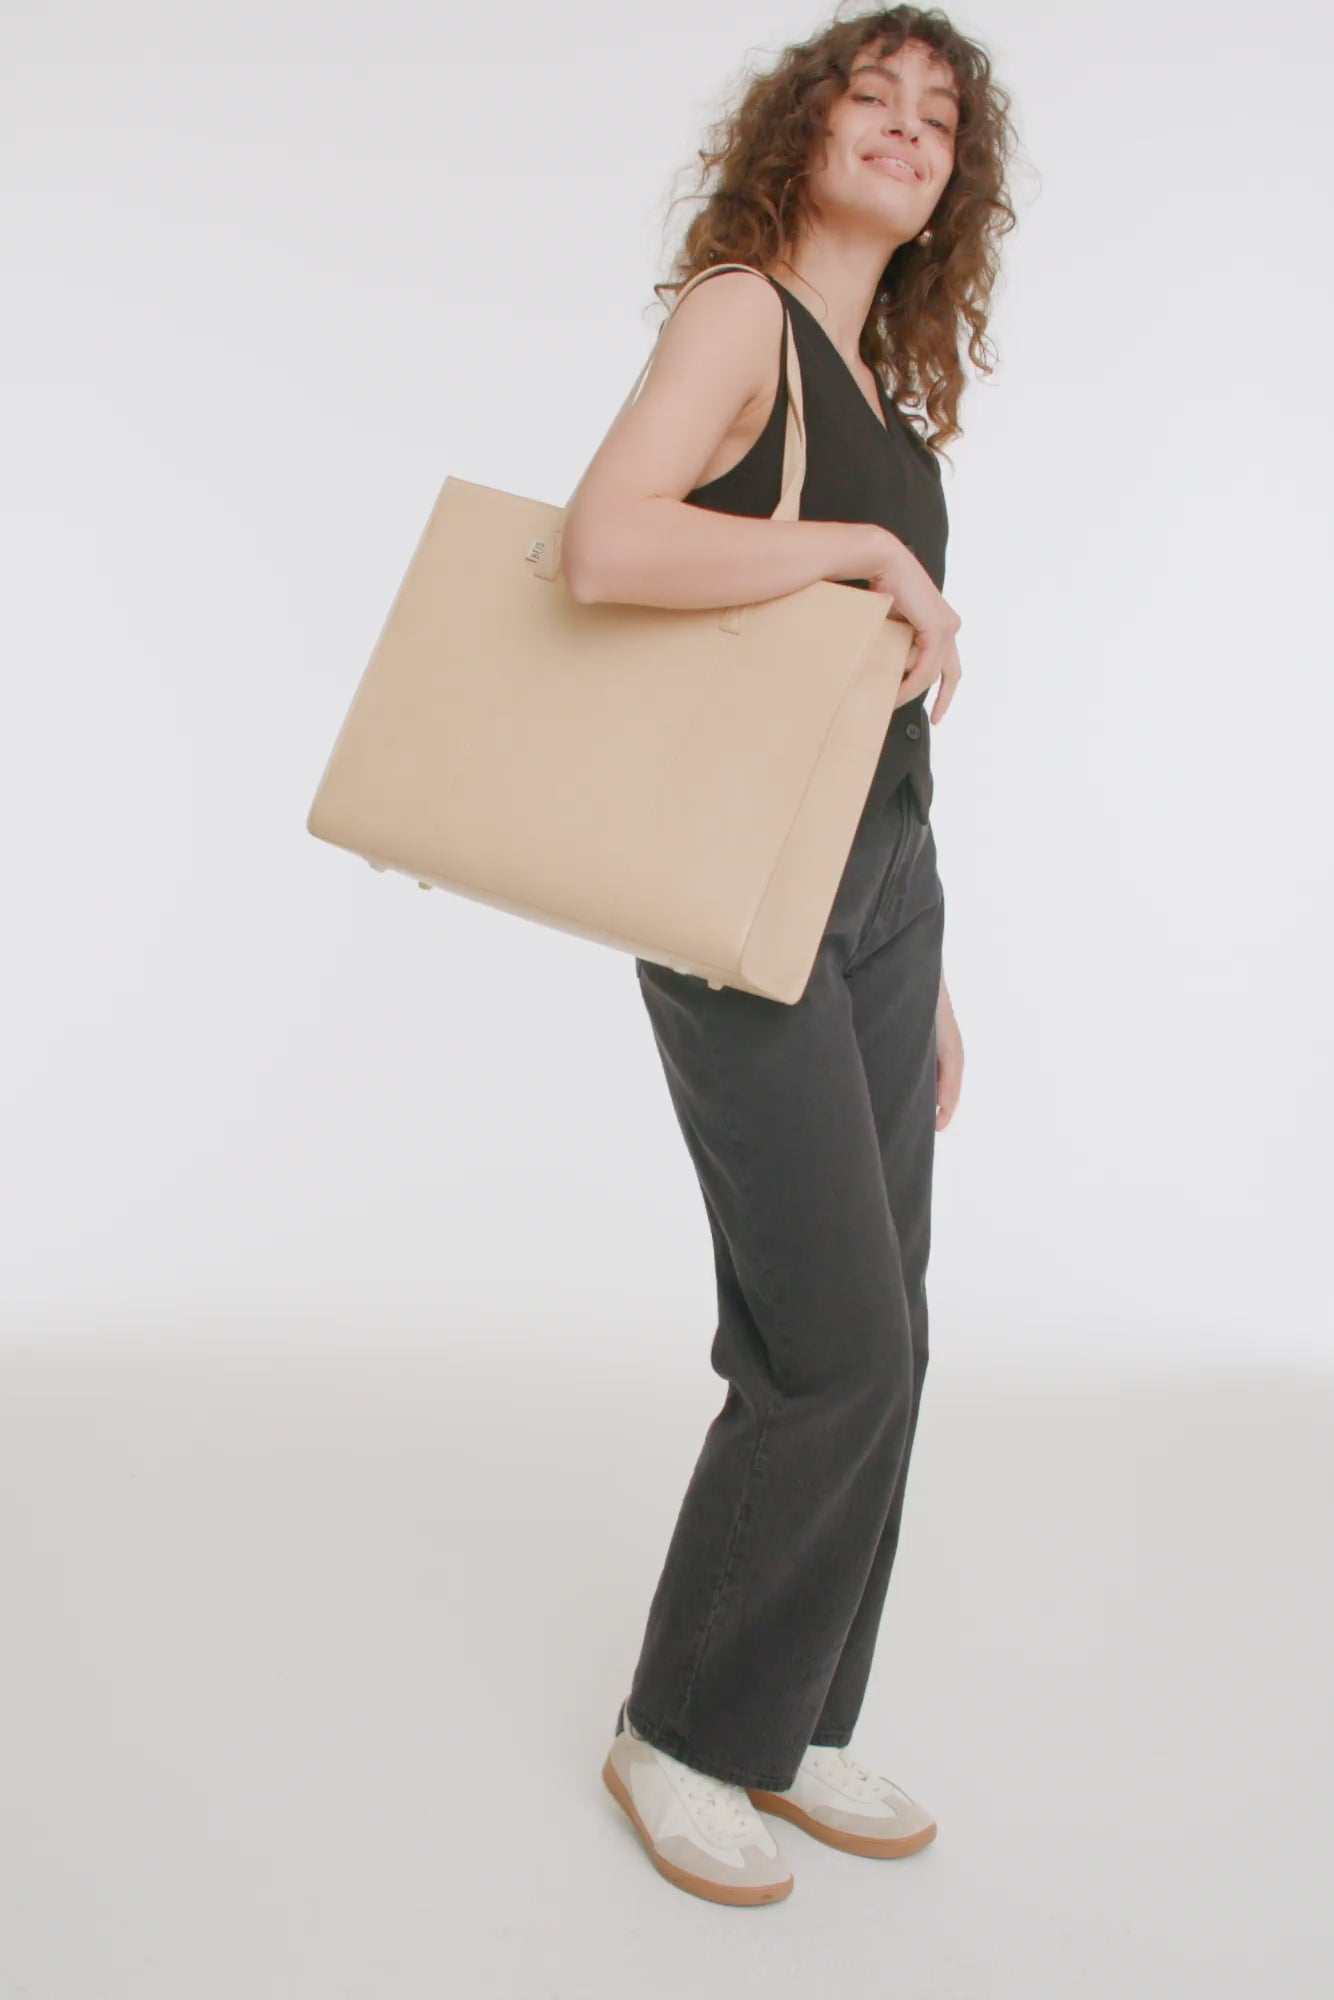 BÉIS 'The Large Work Tote' in Beige - Work Bag For Women & Laptop Bag